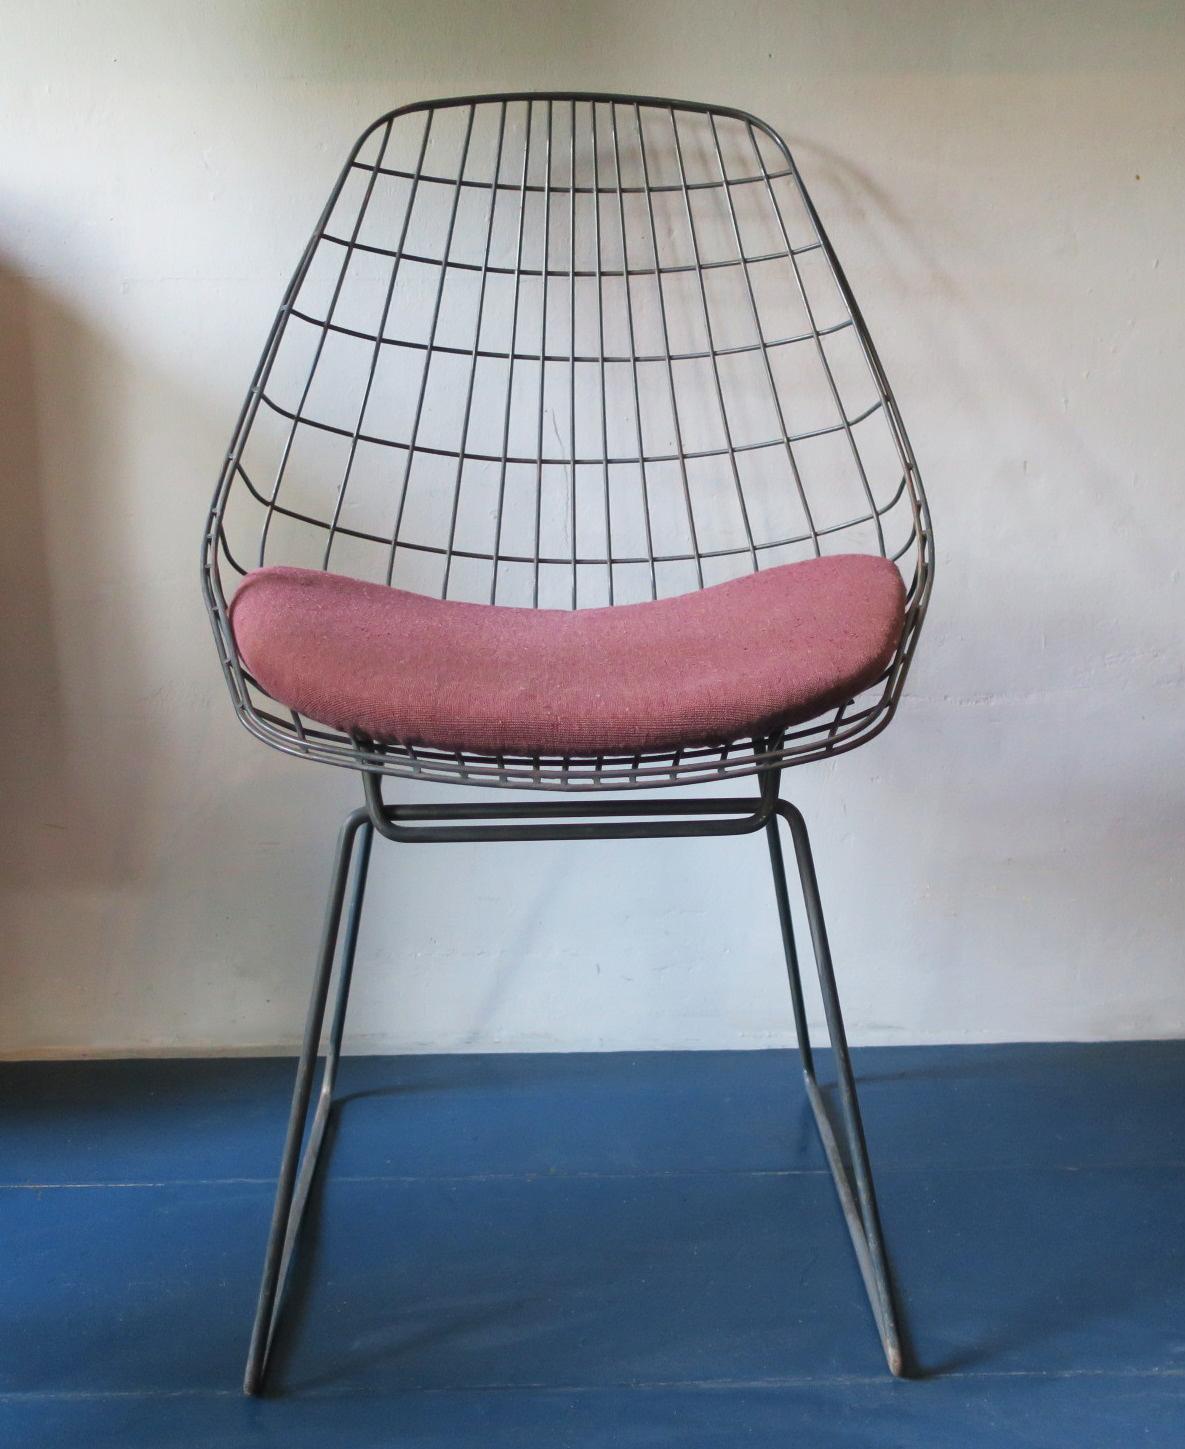 Midcentury Cees Braakman SM05 chair, design classic from the 1950s with original cushion.